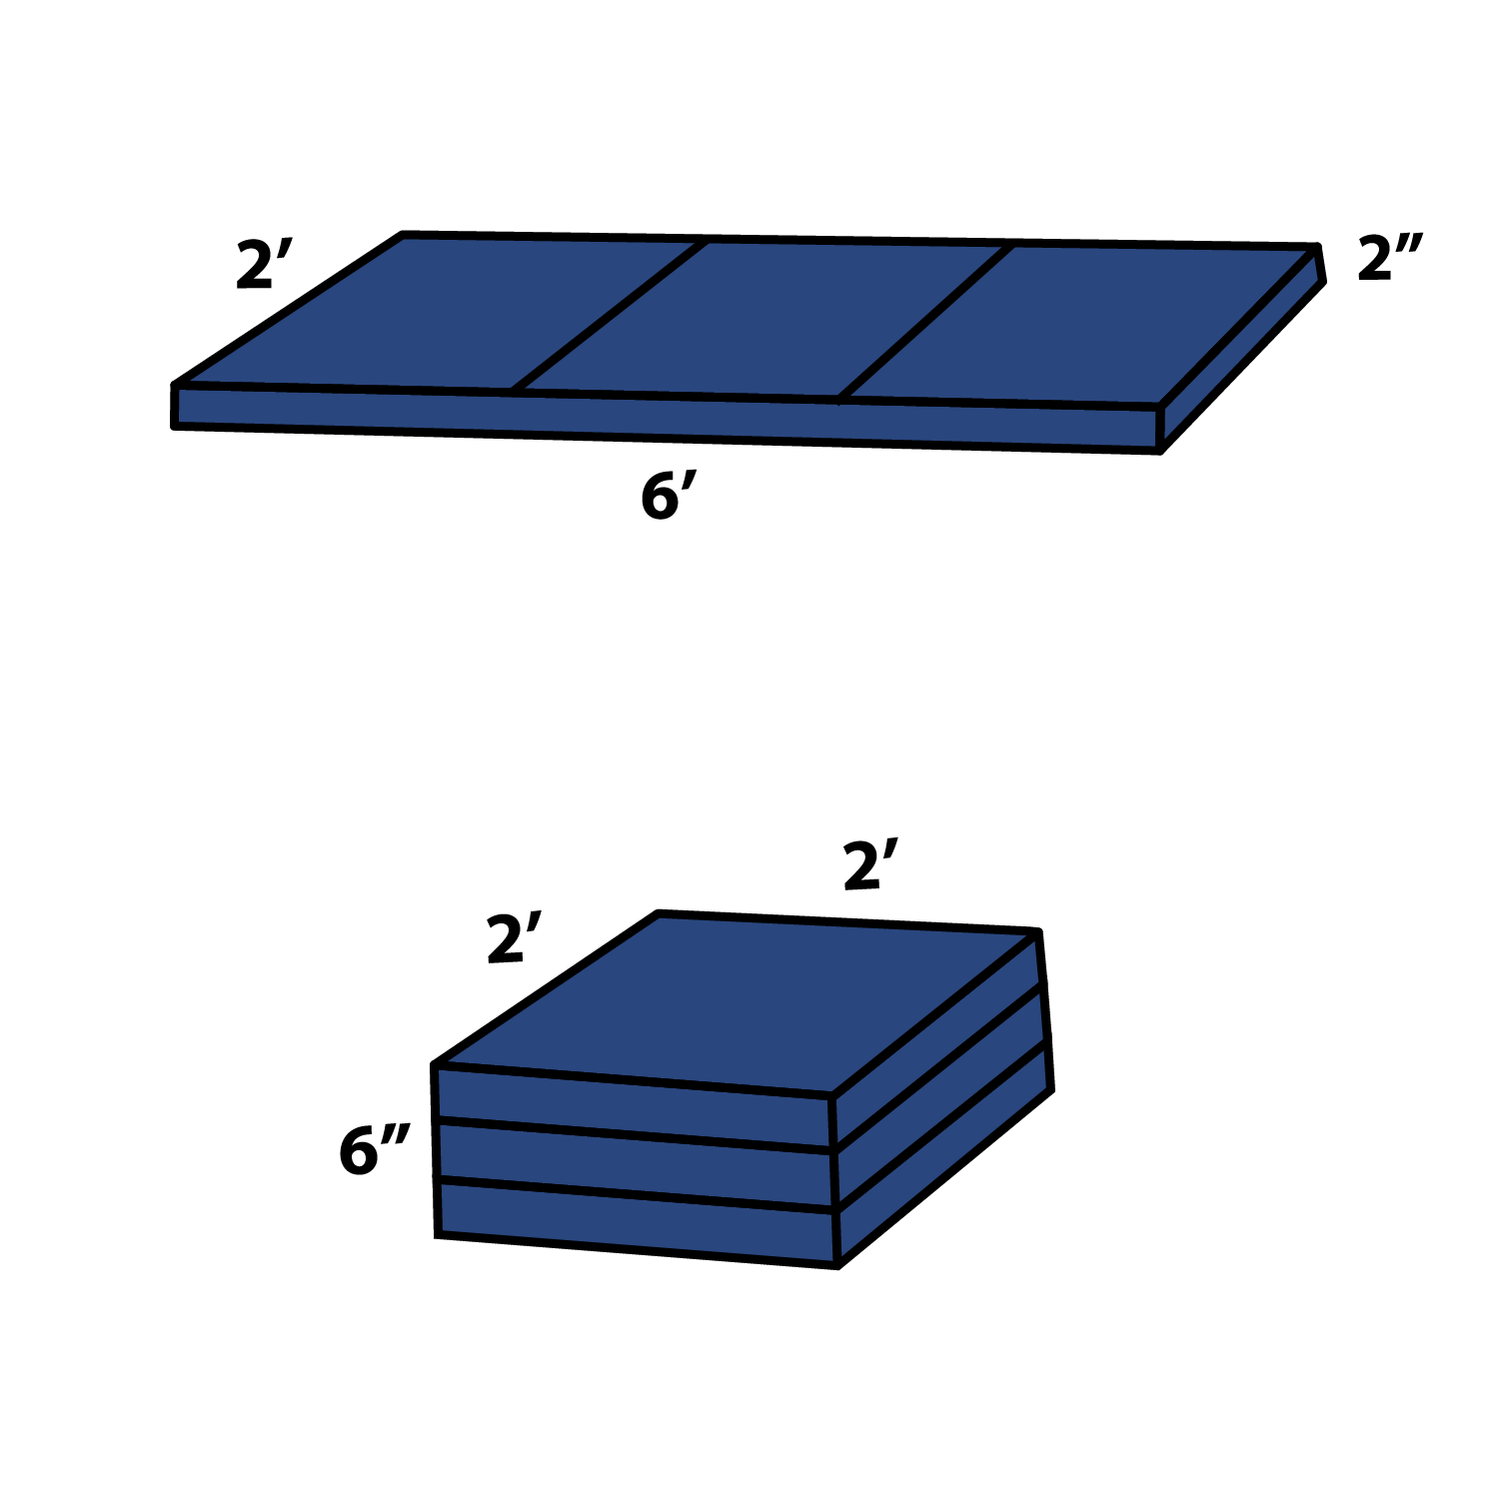 Folding exercise mat dimensions. The expanded gym mat is 6 feet long, 2 feet wide and 2 inches thick. Folded exercise mat is 2 feet by 2 feet and 6 inches thick.